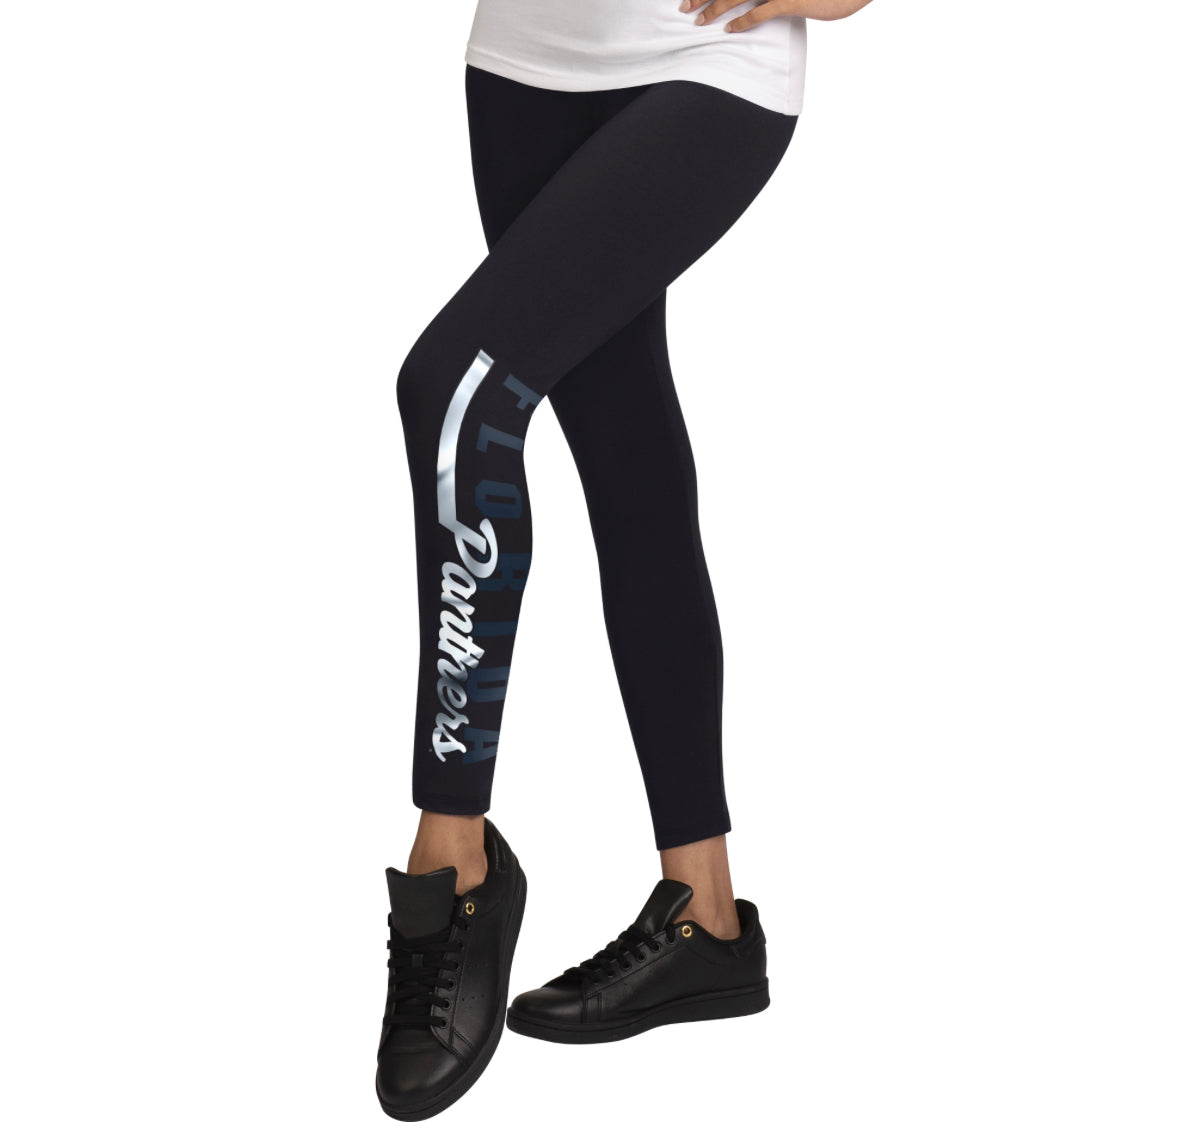 Florida Panthers Glll 4Her Women's 4th Down Leggings - Black